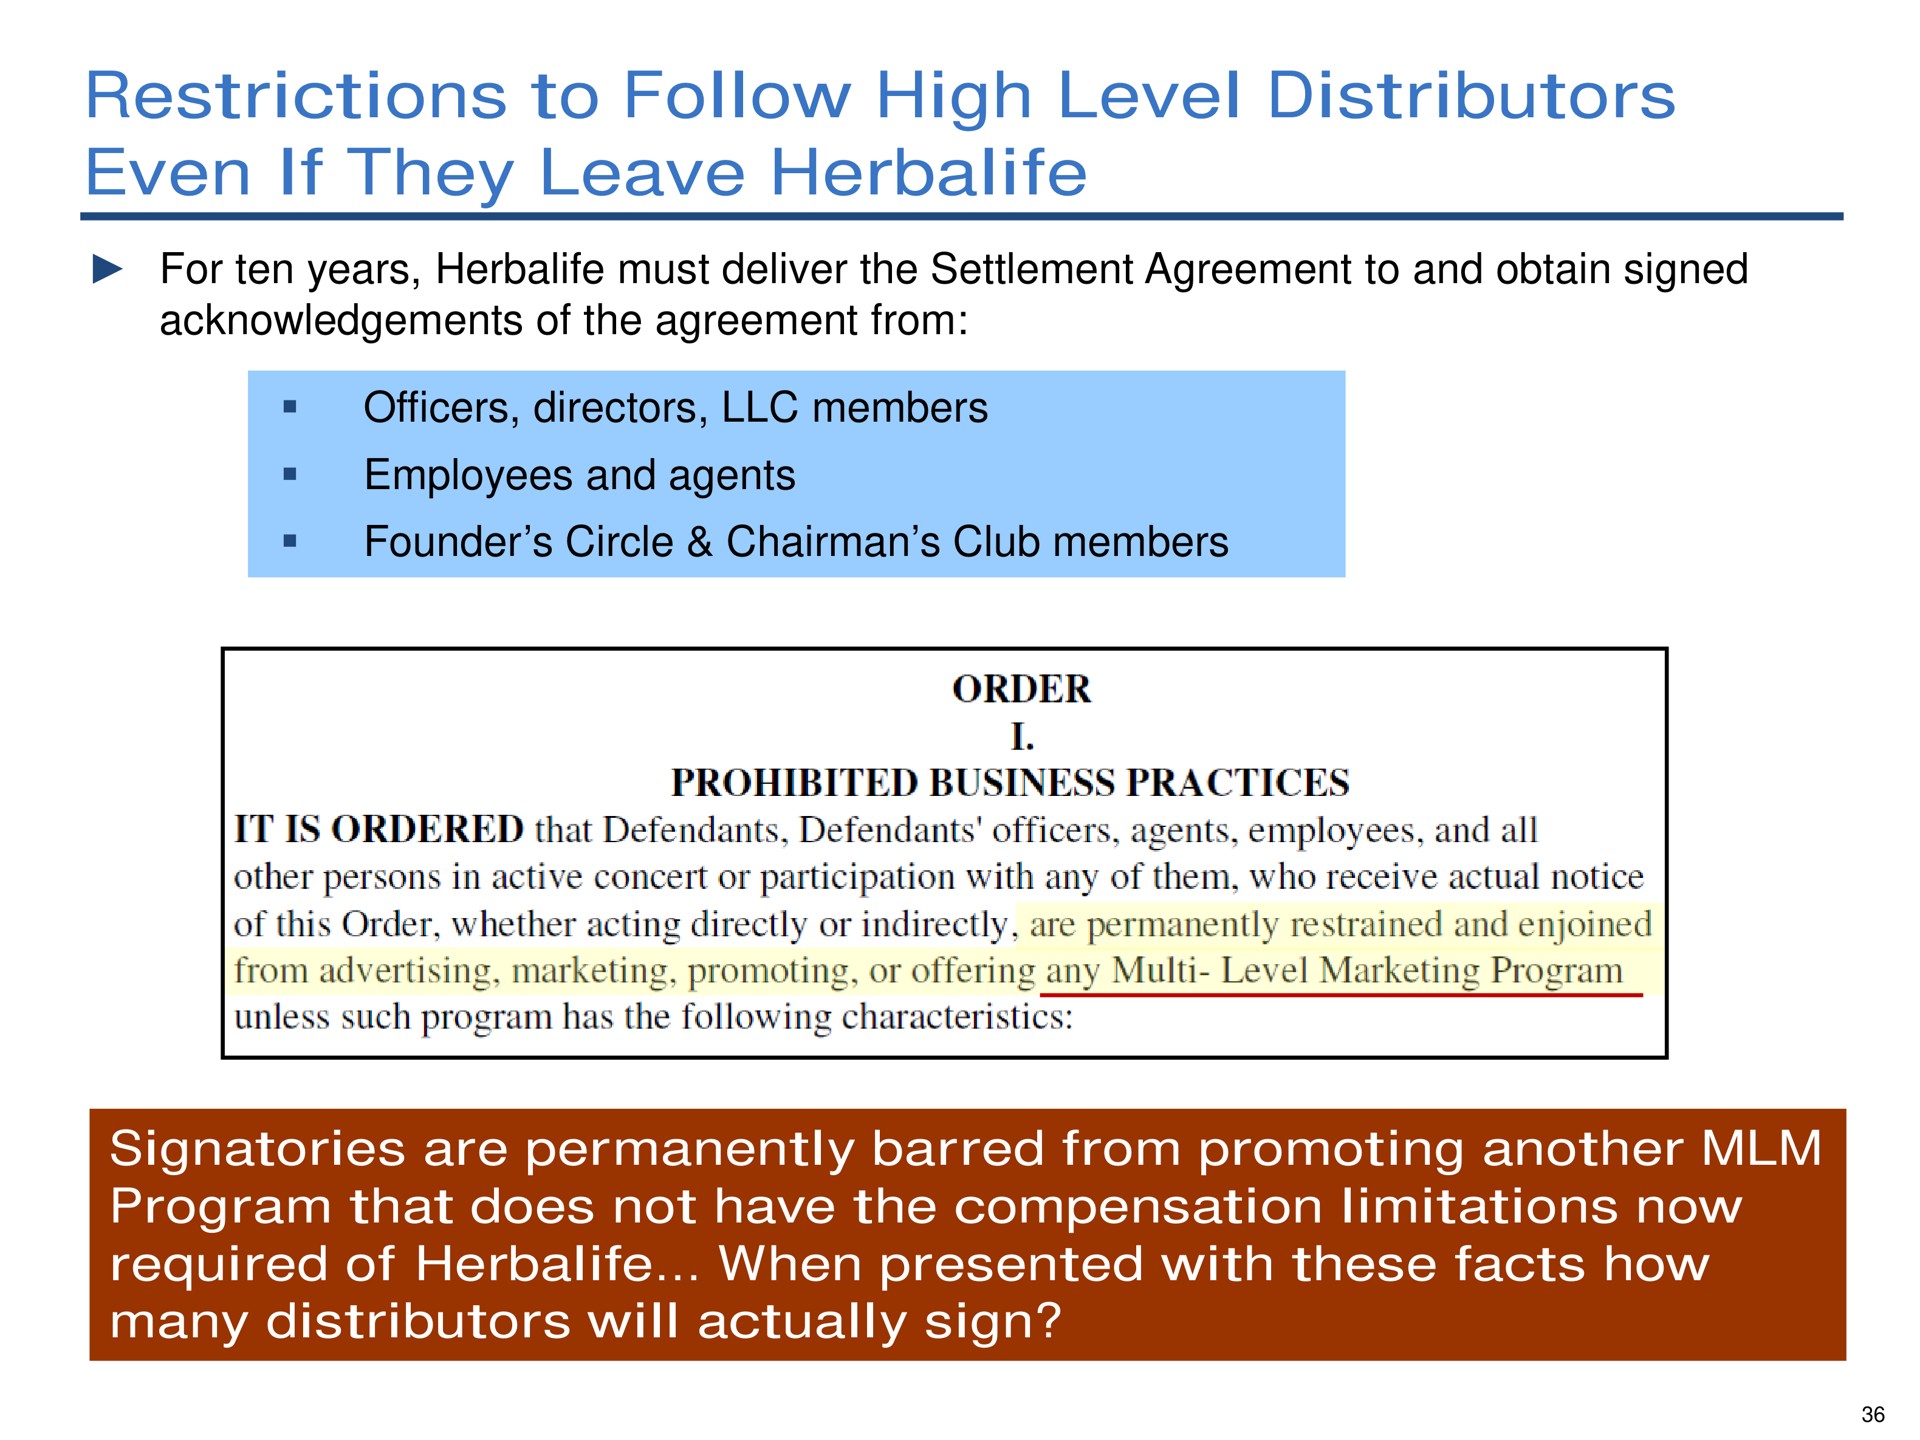 restrictions to follow high level distributors even if they leave | Pershing Square